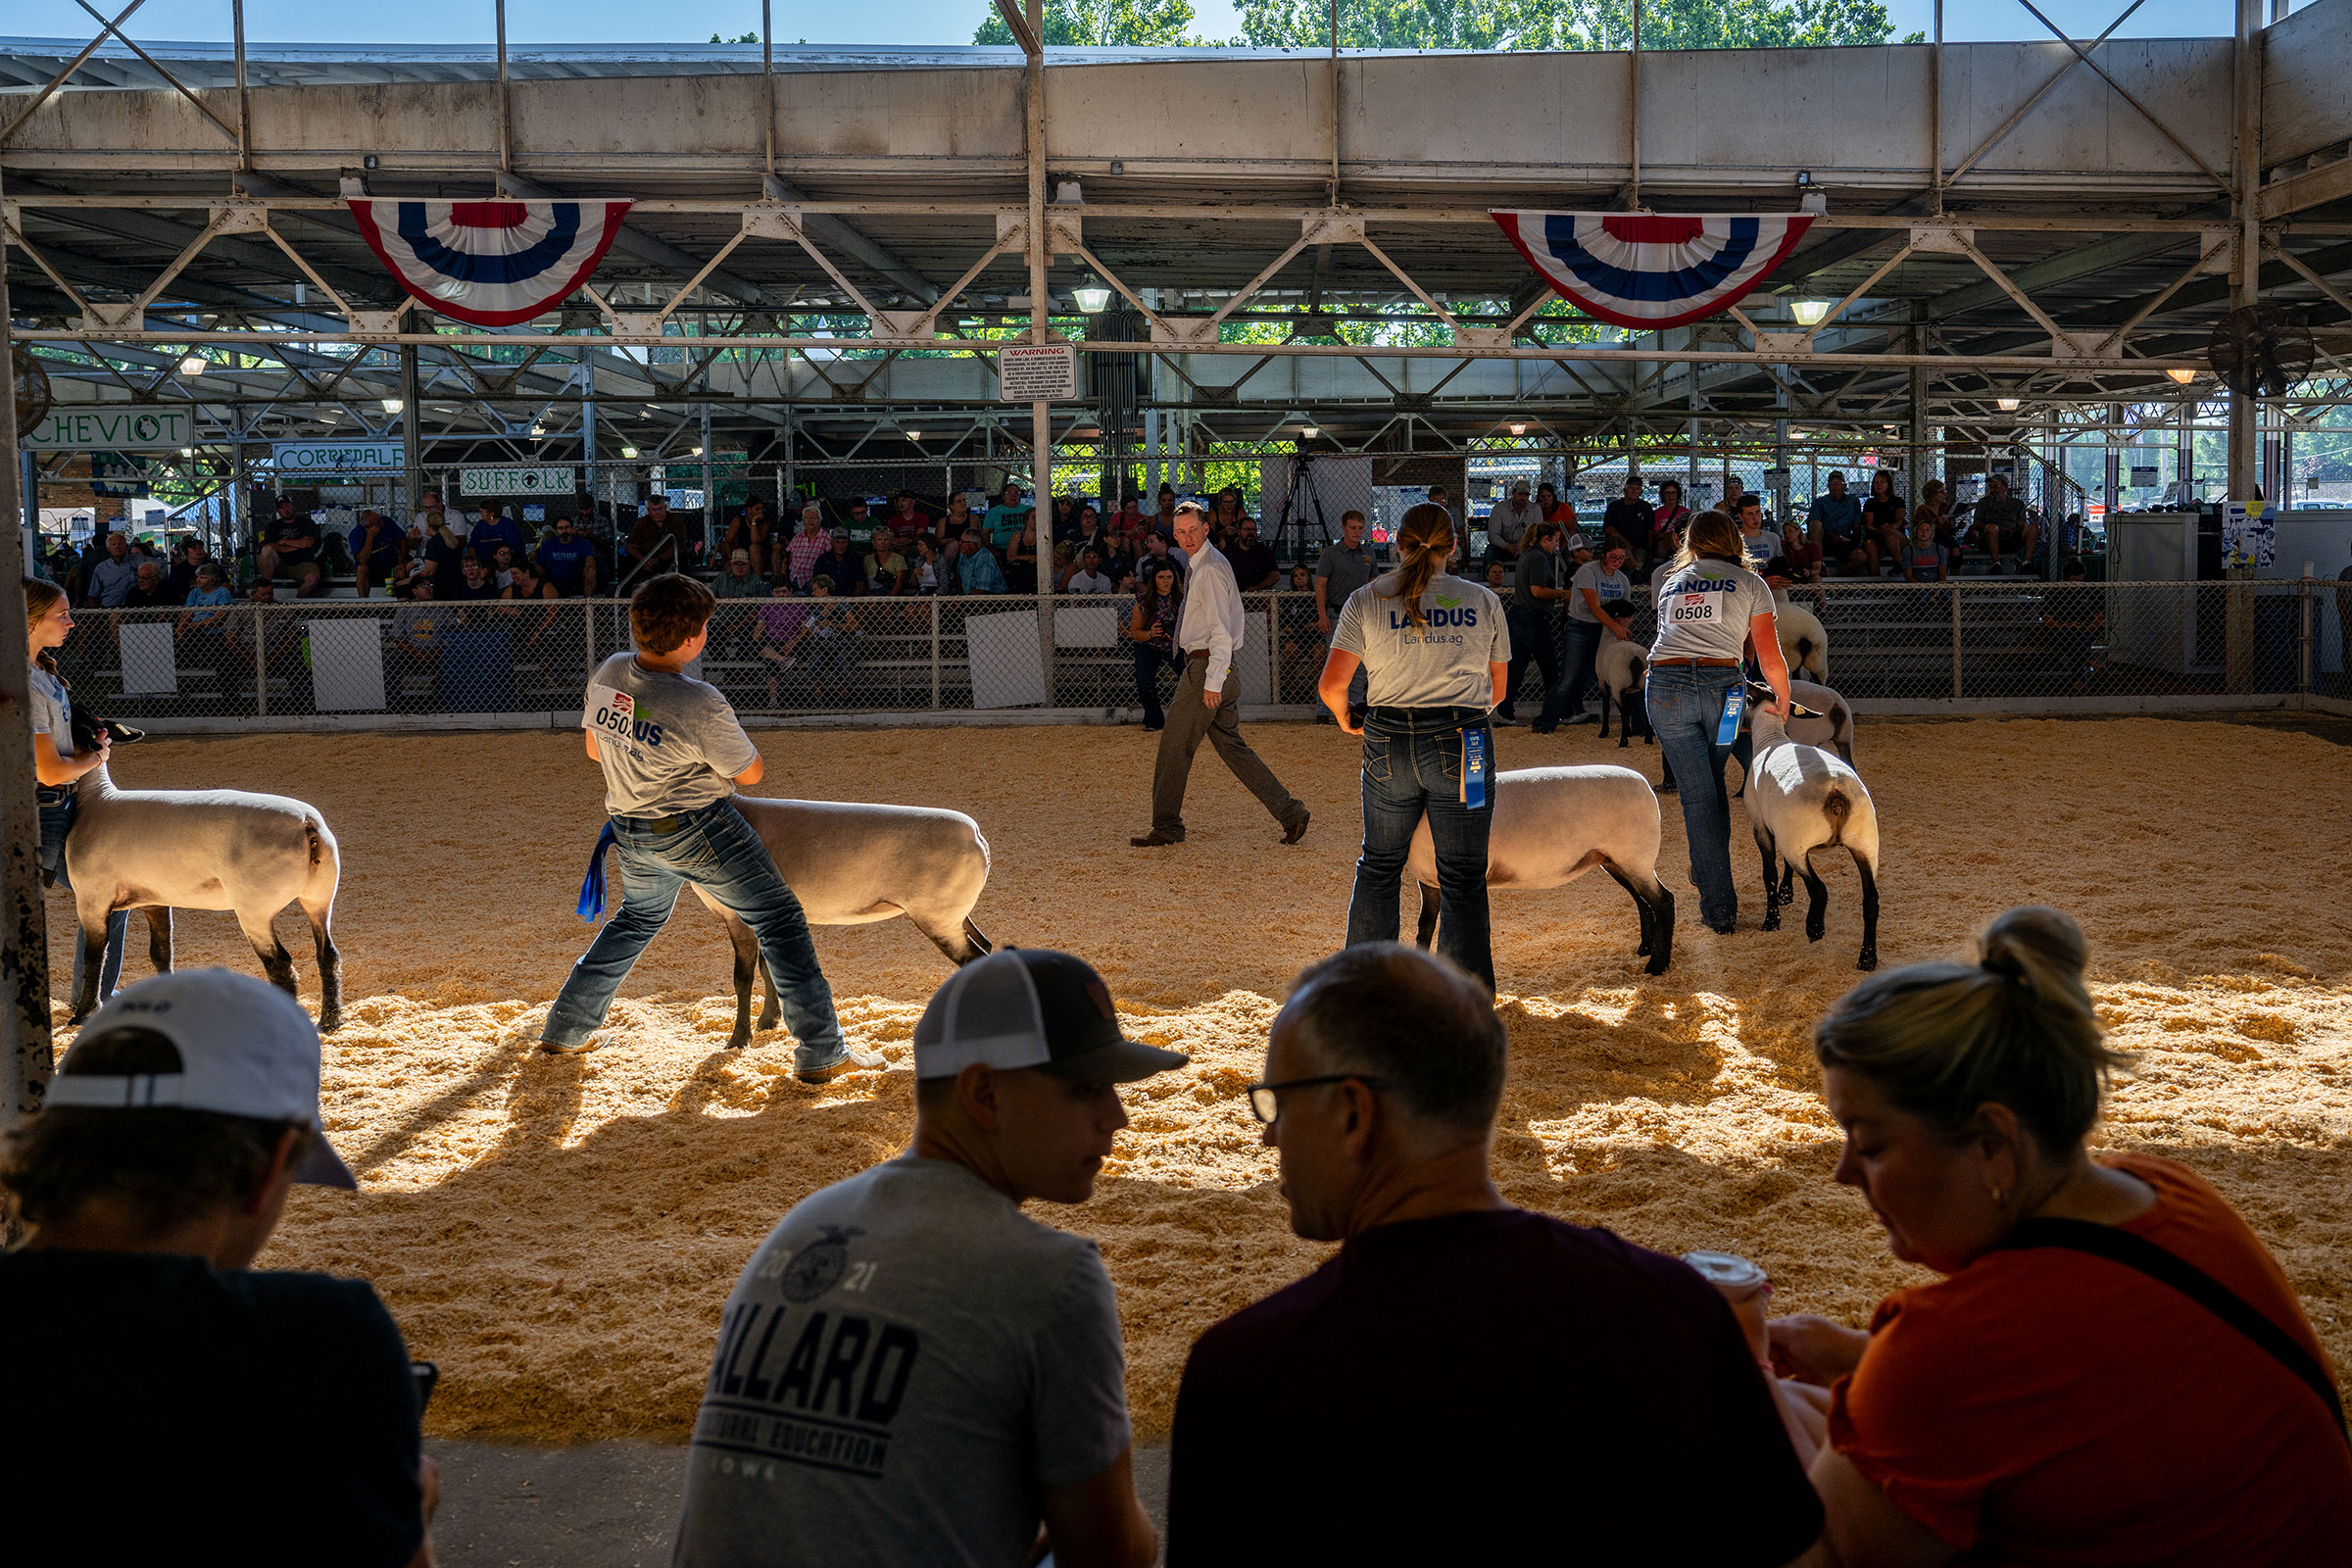 A judge evaluates contestants' livestock during a competition inside the Sheep Barn on Aug. 11. (Brandon Bell—Getty Images)